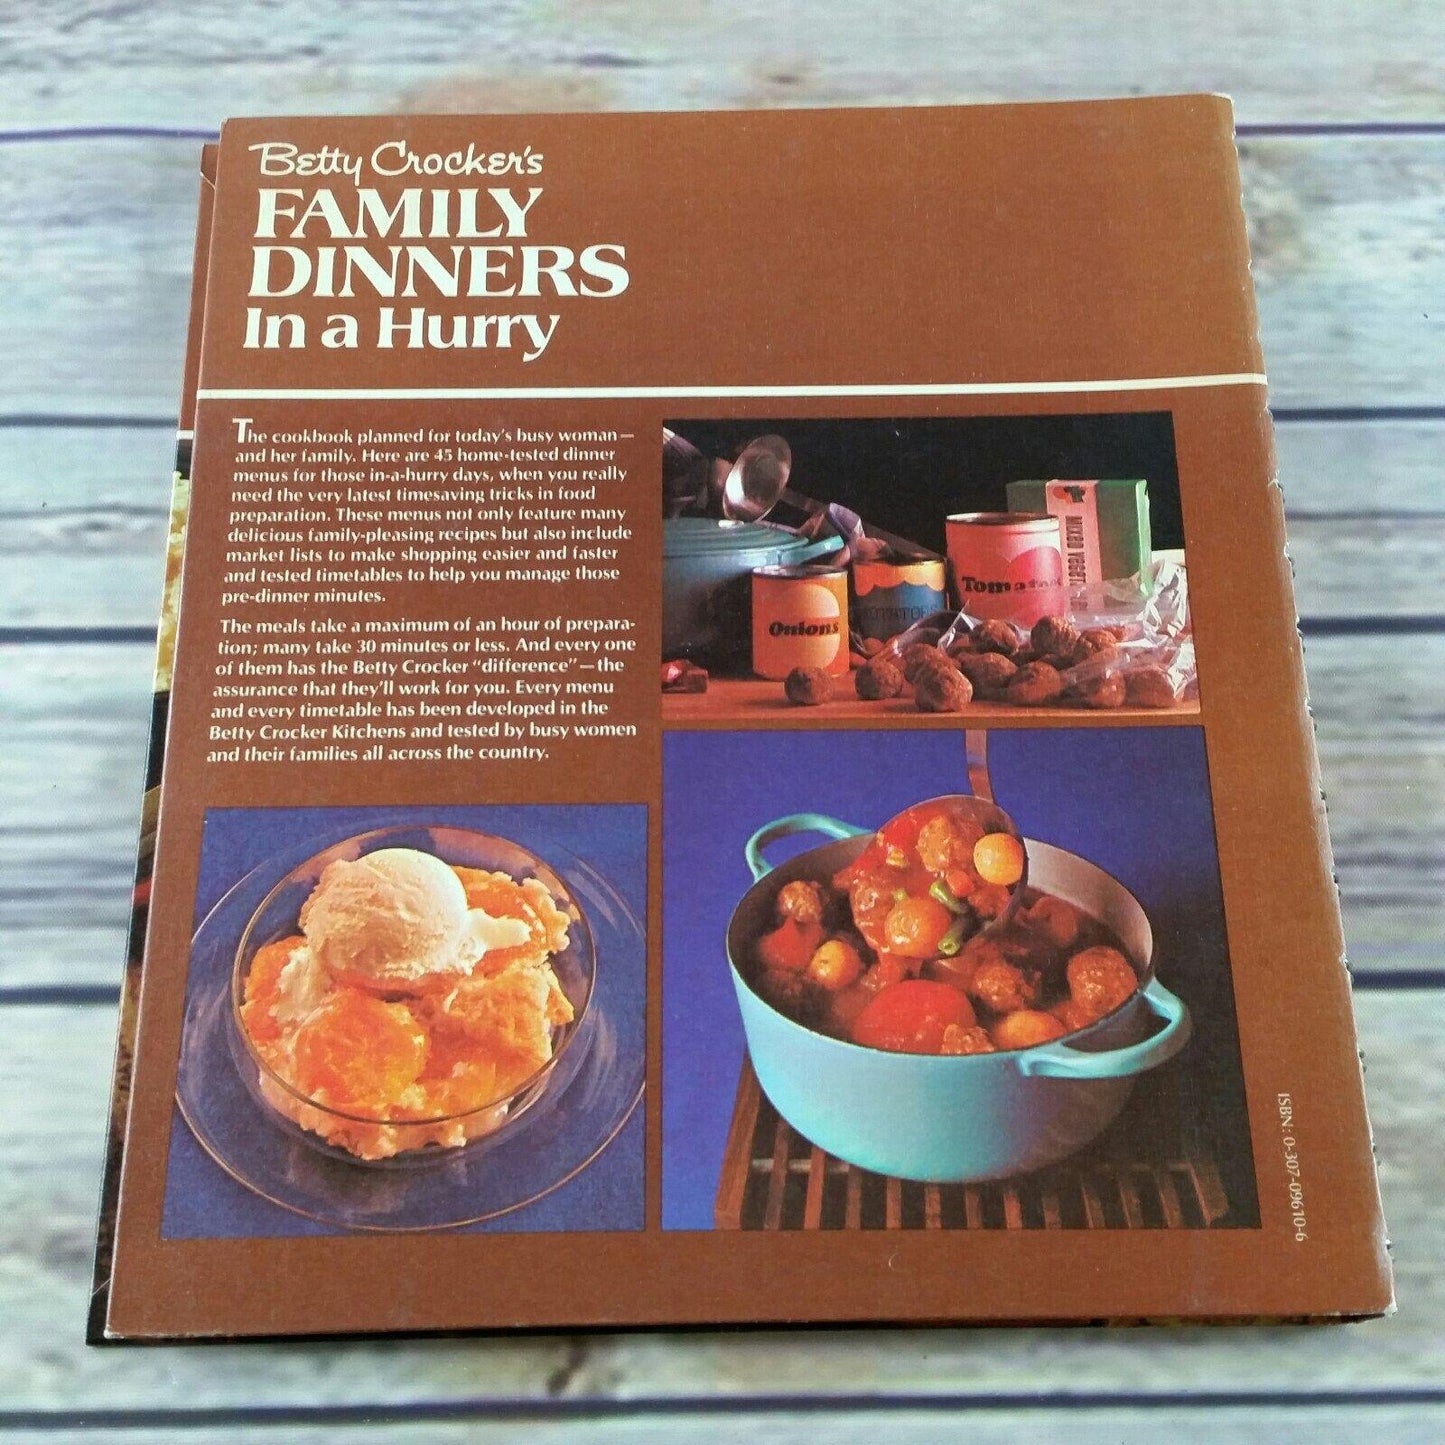 Vintage Cookbook Betty Crocker Family Dinners In A Hurry 1974 Hardcover Spiral Bound 6th Printing Meals in Minutes